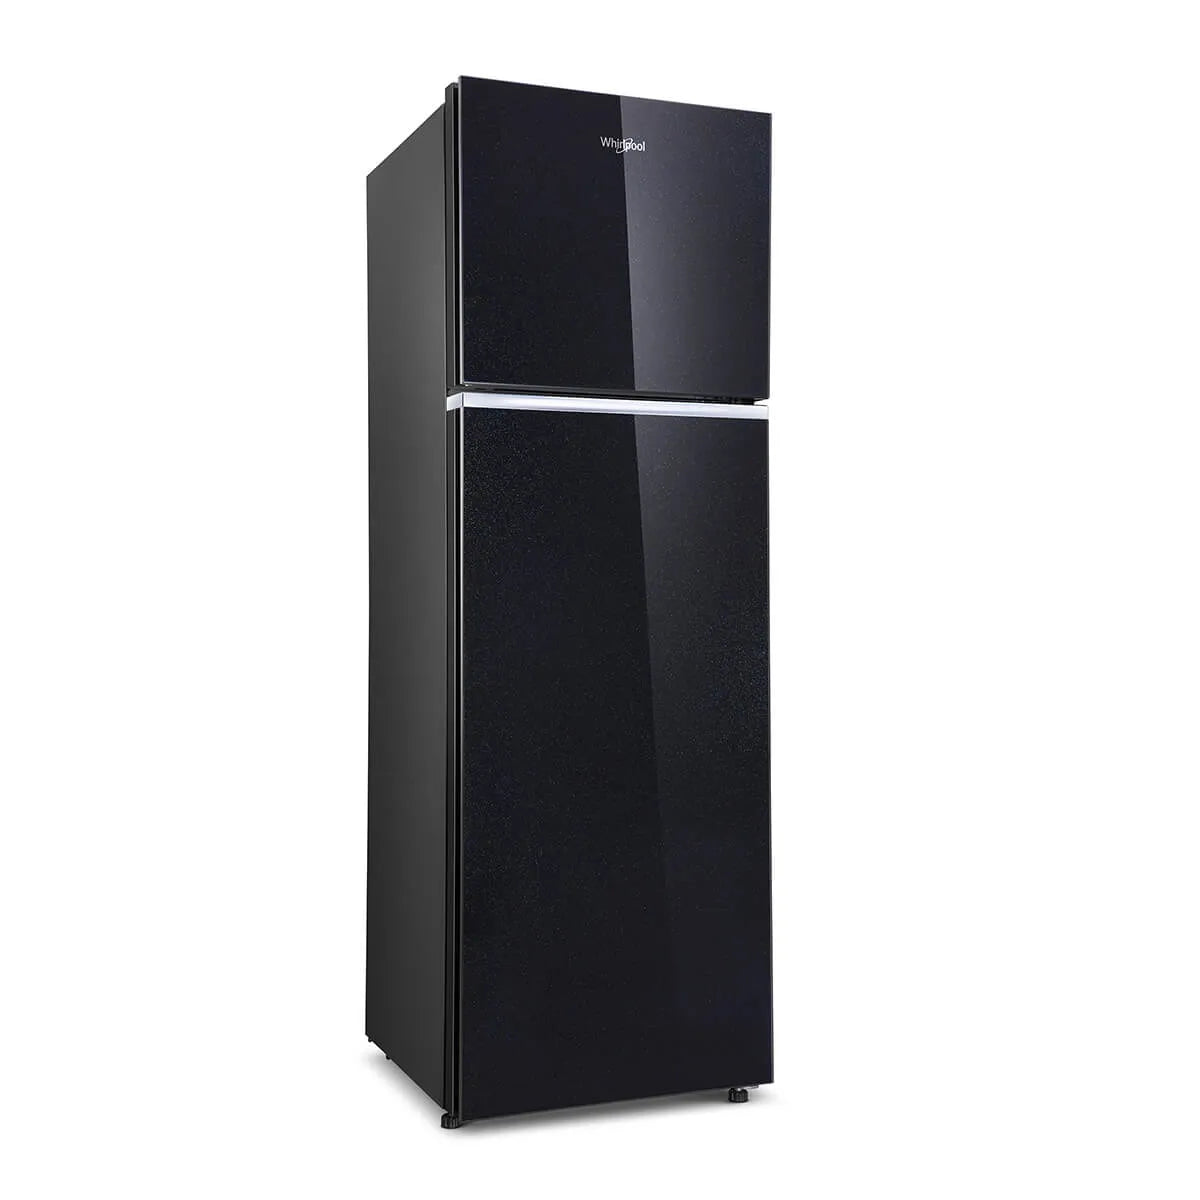 Whirlpool Neofresh 235L 2 Star Glass Finish Frost Free Double-Door Refrigerator (22052)